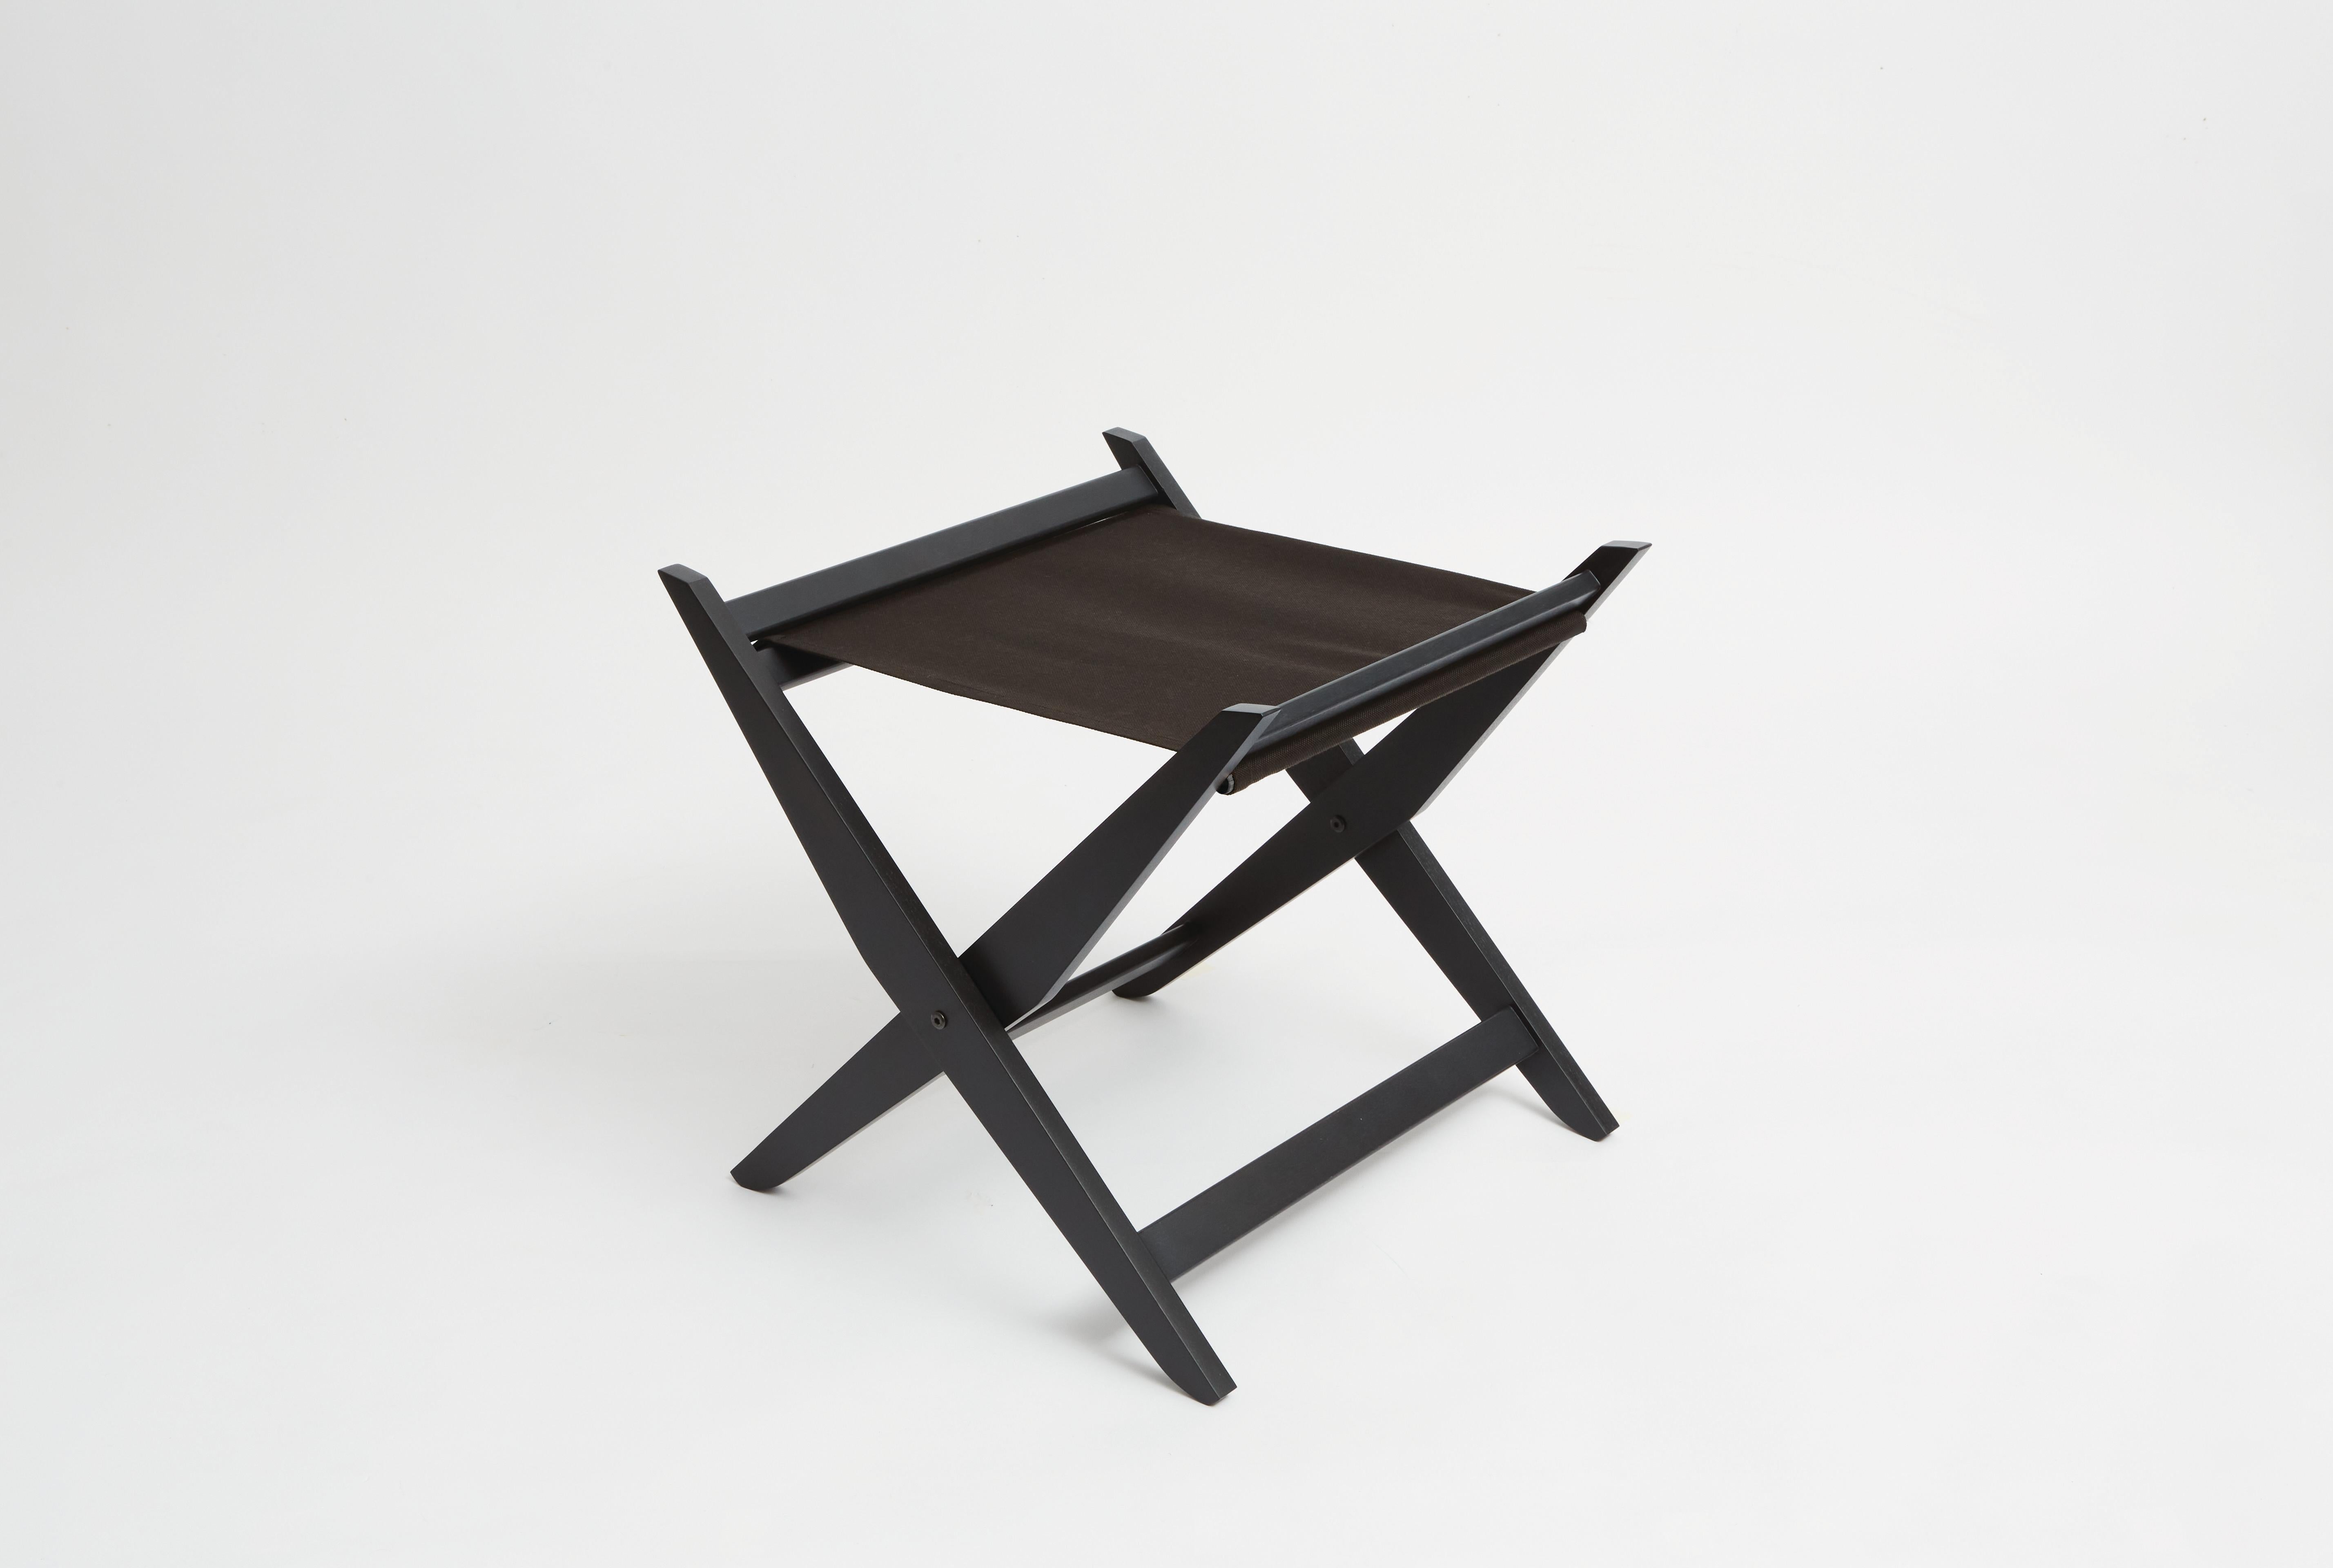 Machine-Made 21st Century Ash Wood Footstool or Low seat by Devo Design For Sale